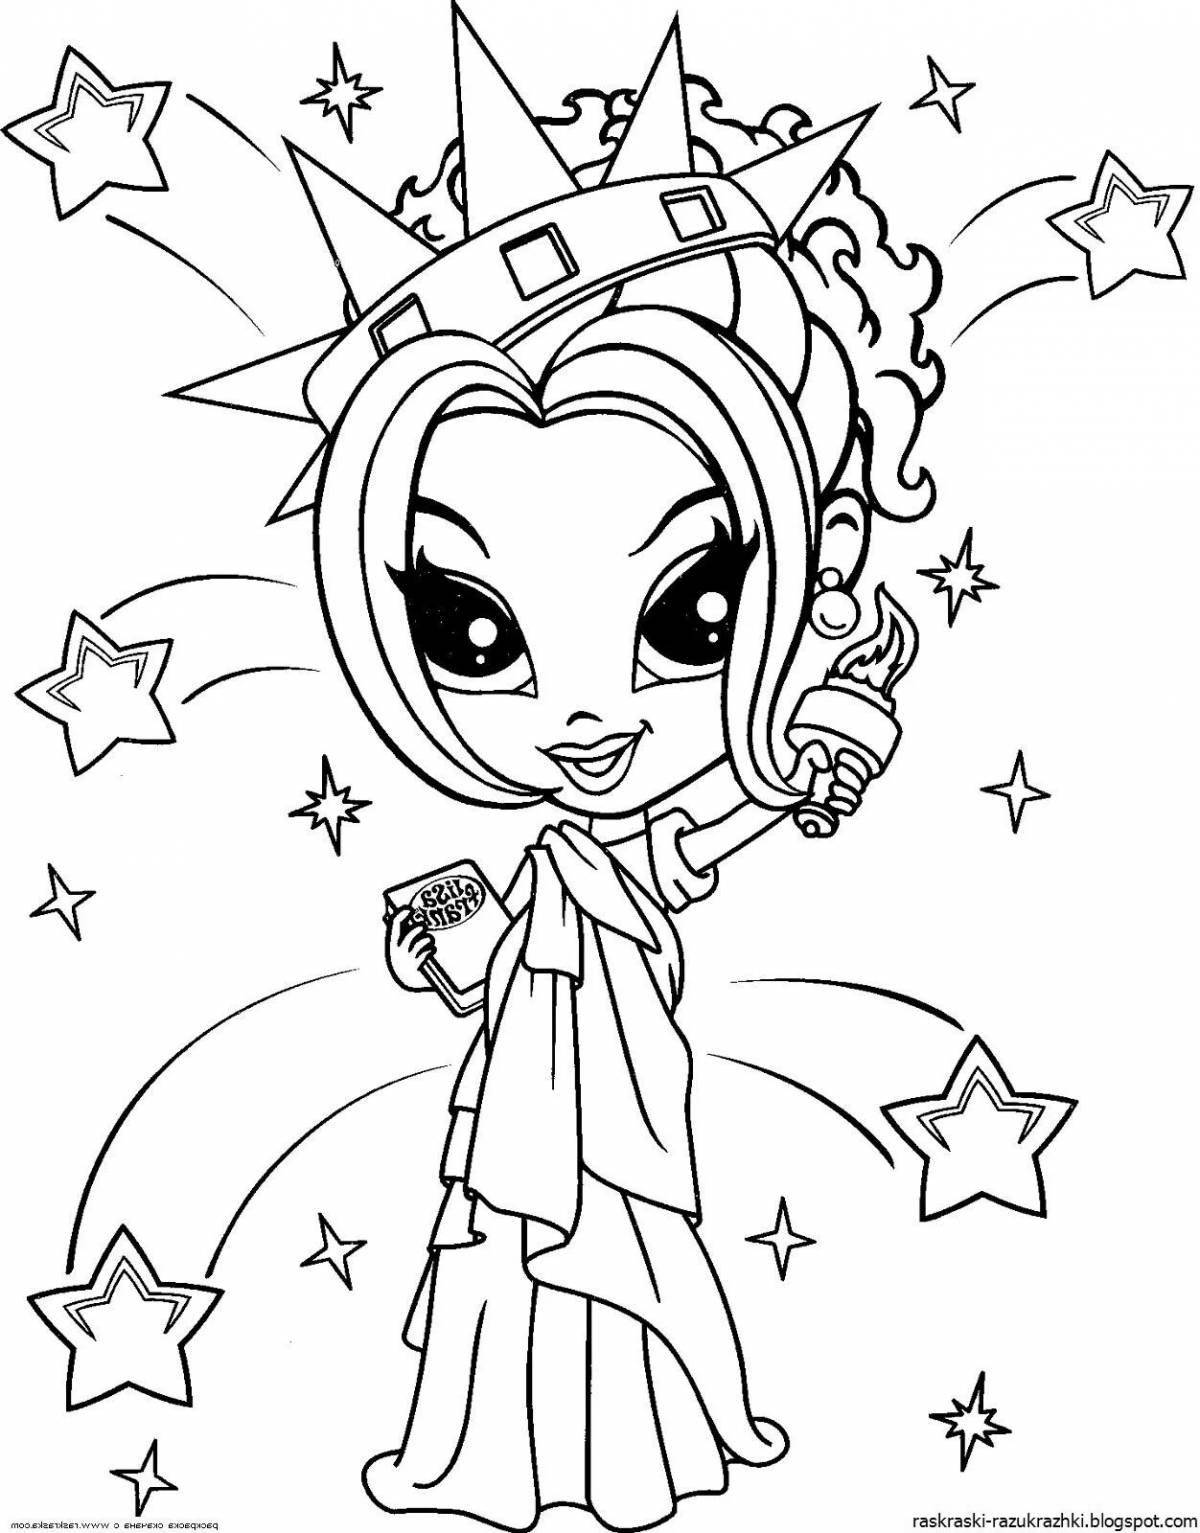 Exalted coloring book for girls 100000000000 years old